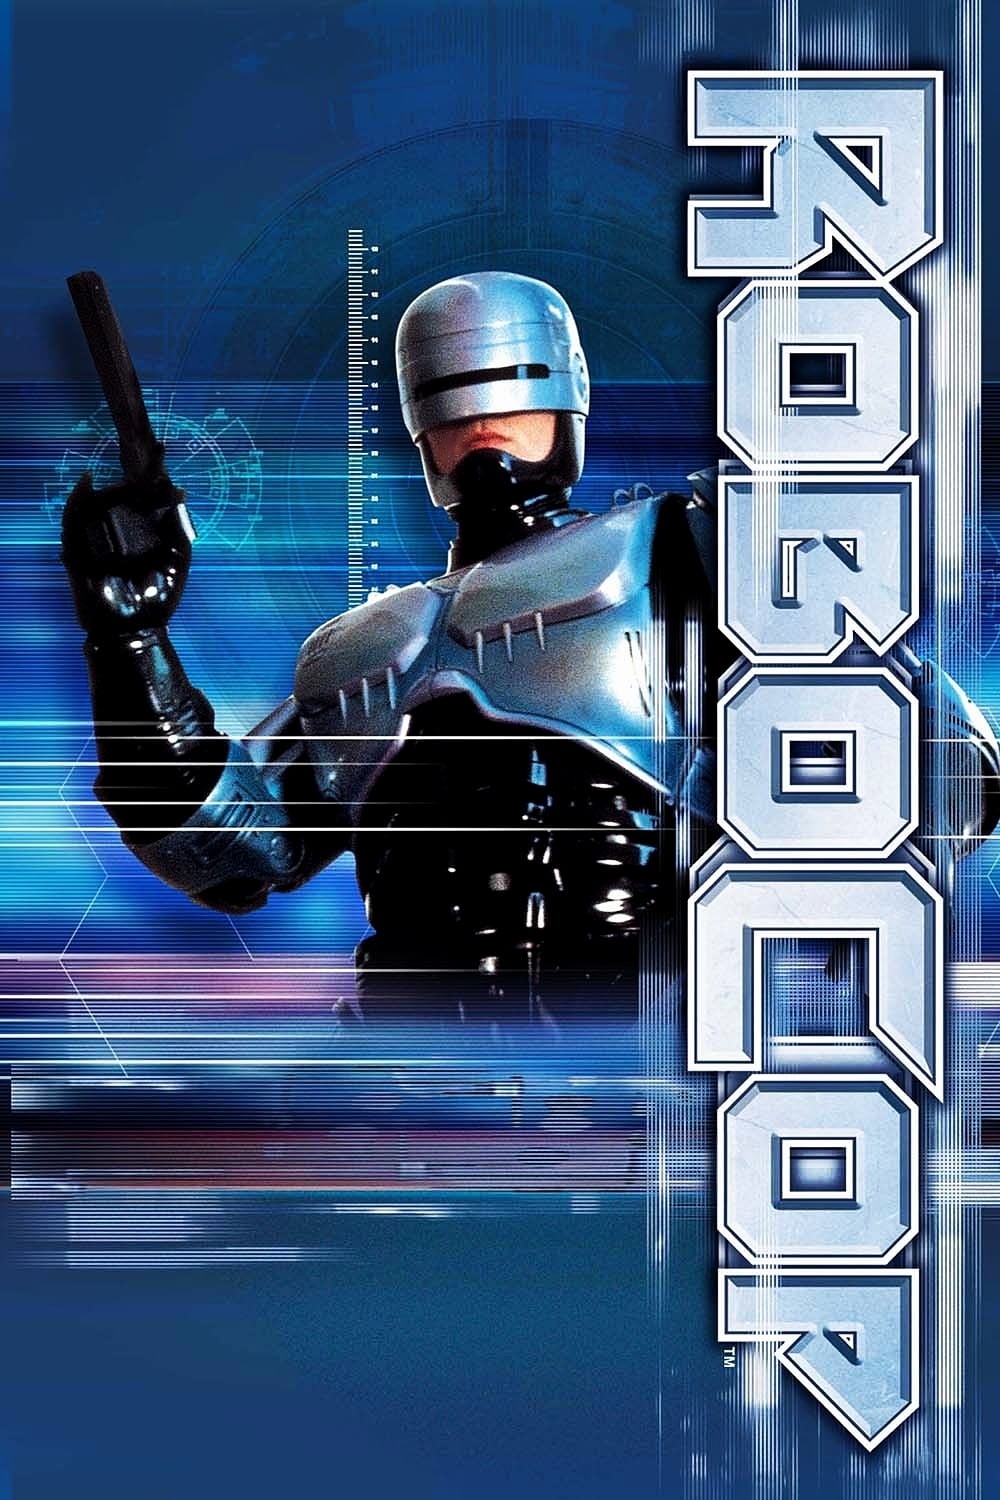 RoboCop: The Series TV Shows About Cyborg